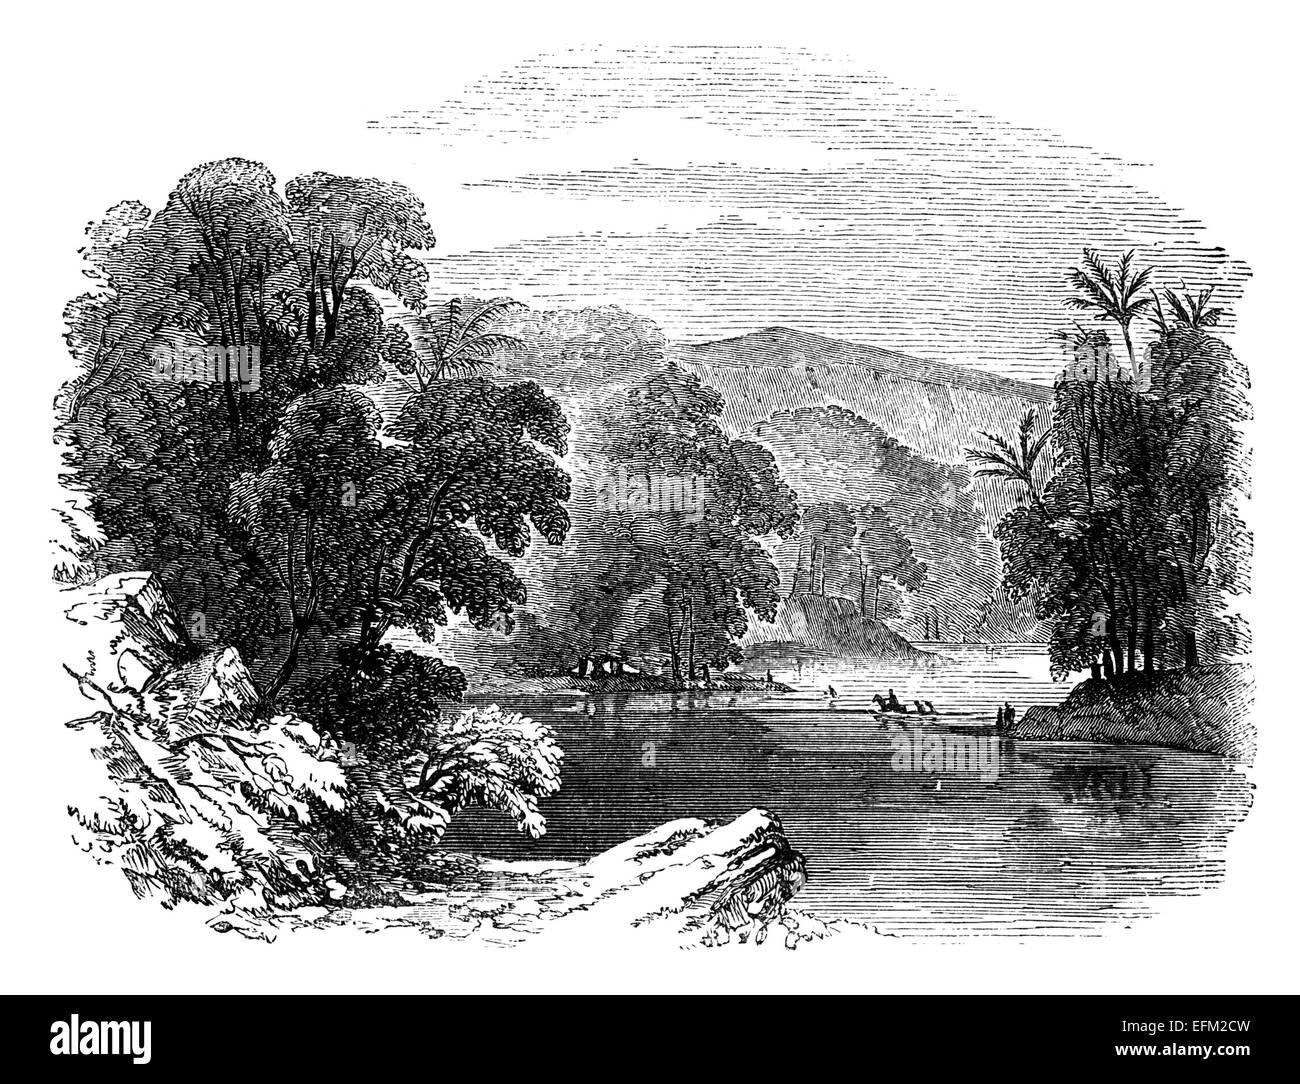 19th century engraving of the Jordan River and lush vegetation on the river banks Stock Photo